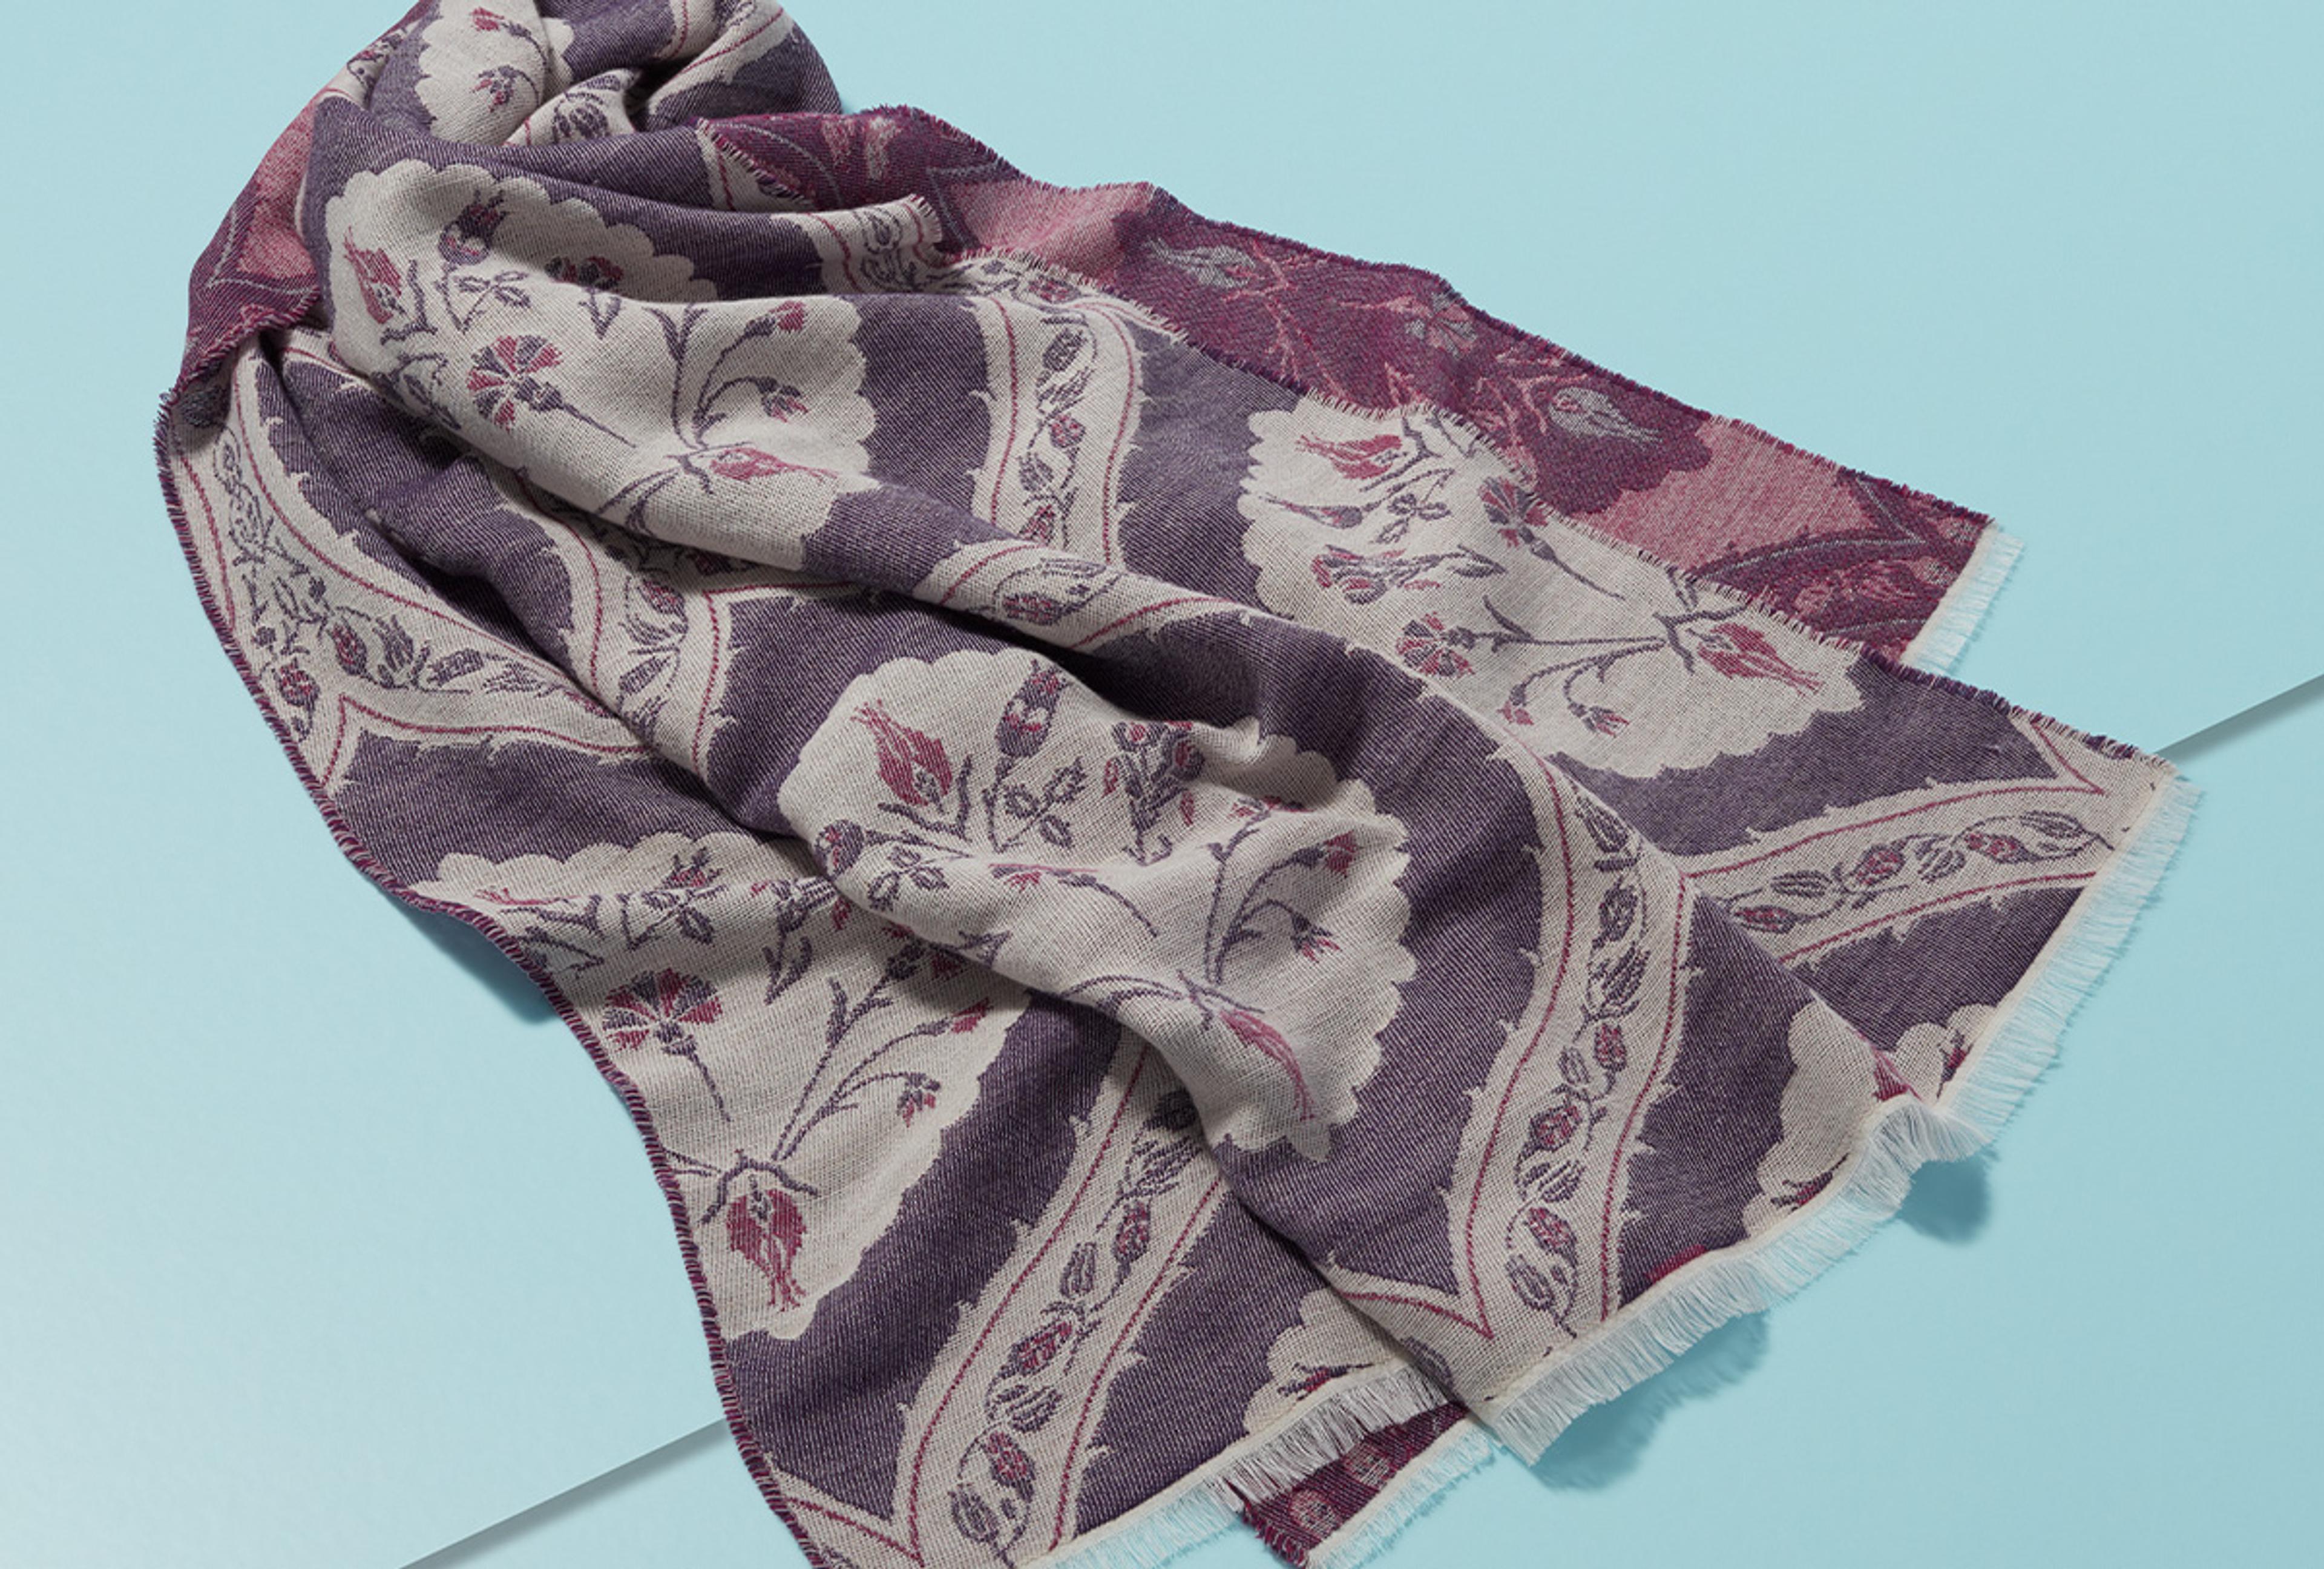 Scarf with a floral print photographed against a bright blue background.